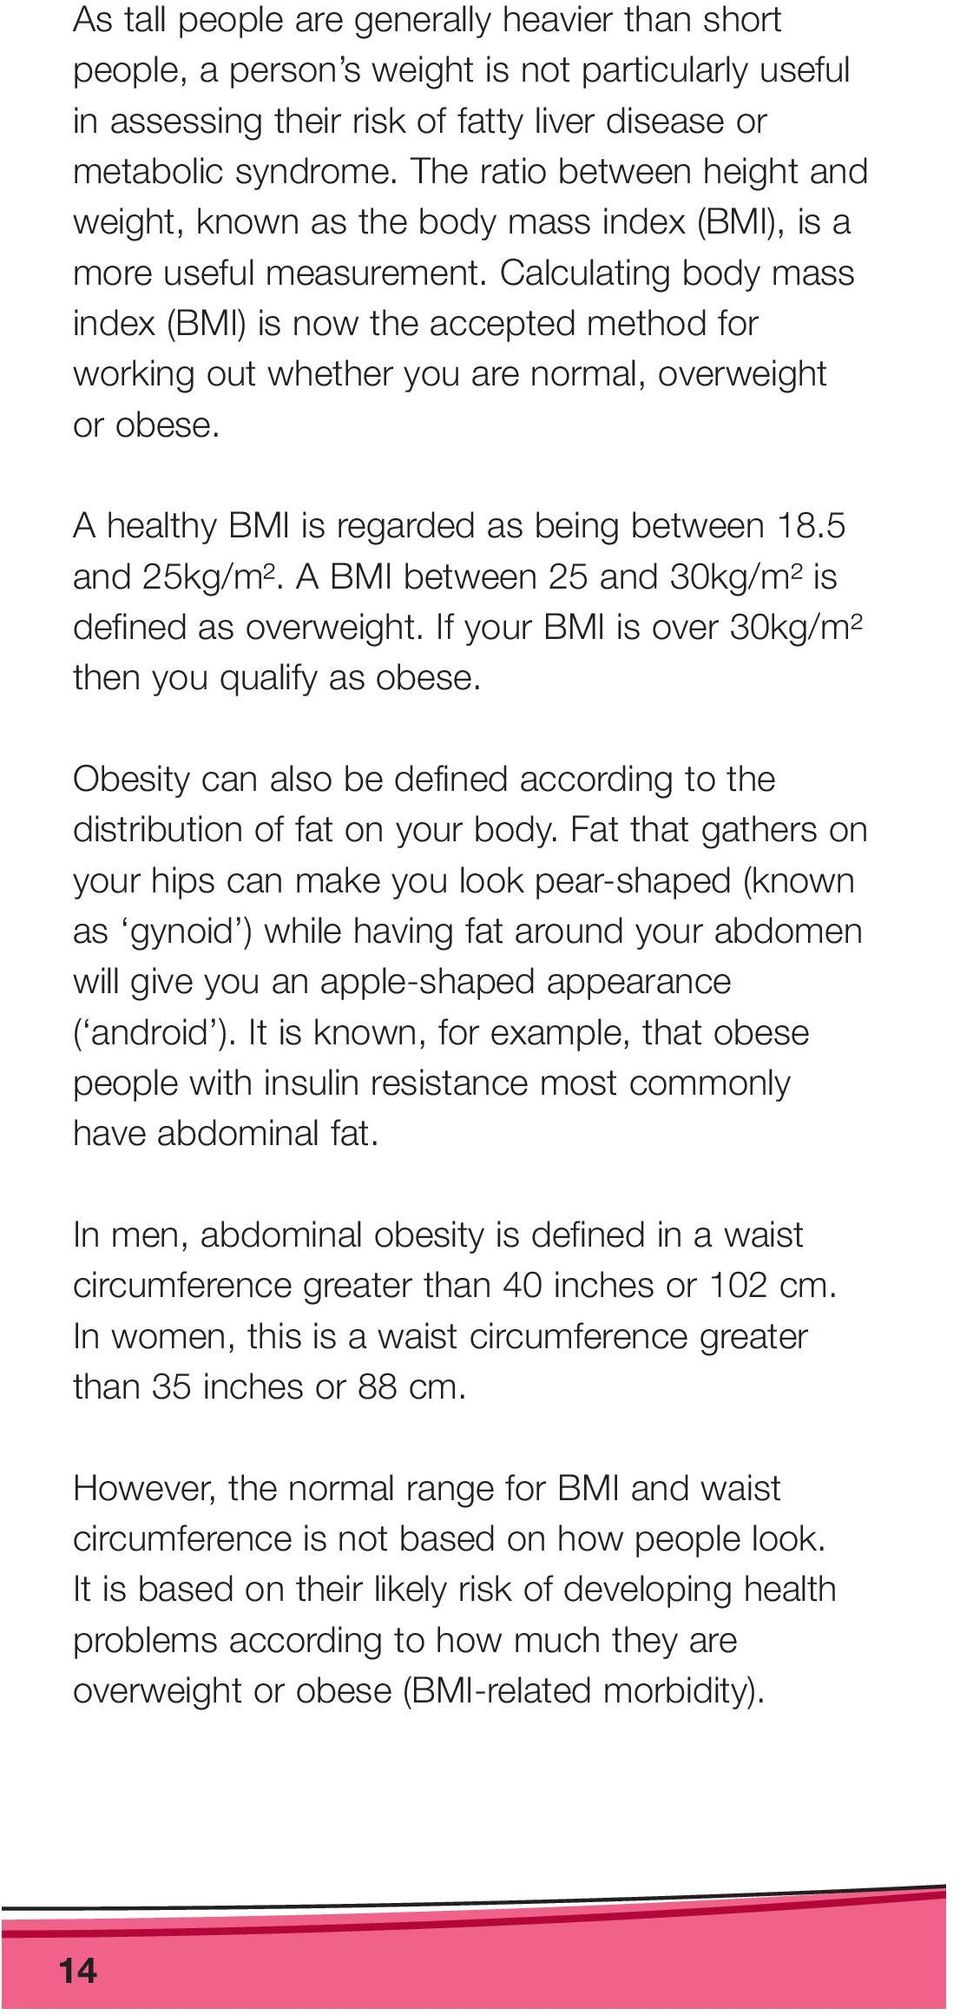 Calculating body mass index (BMI) is now the accepted method for working out whether you are normal, overweight or obese. A healthy BMI is regarded as being between 18.5 and 25kg/m².